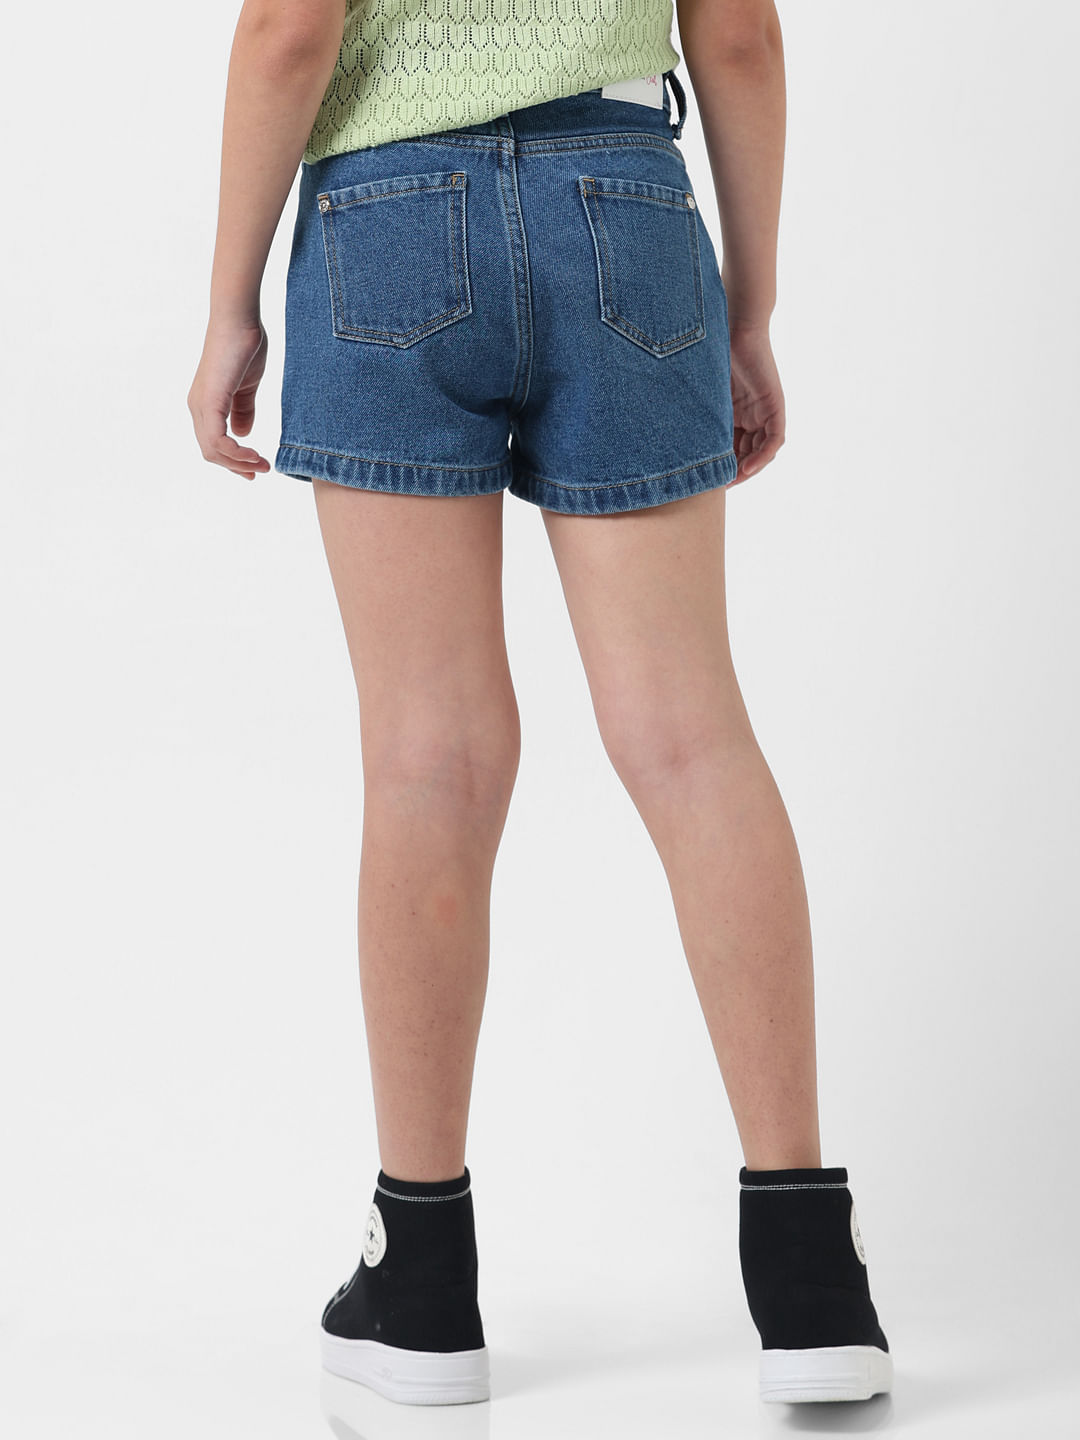 COUXILY Jean Shorts Womens High Waisted Ripped Denim India | Ubuy